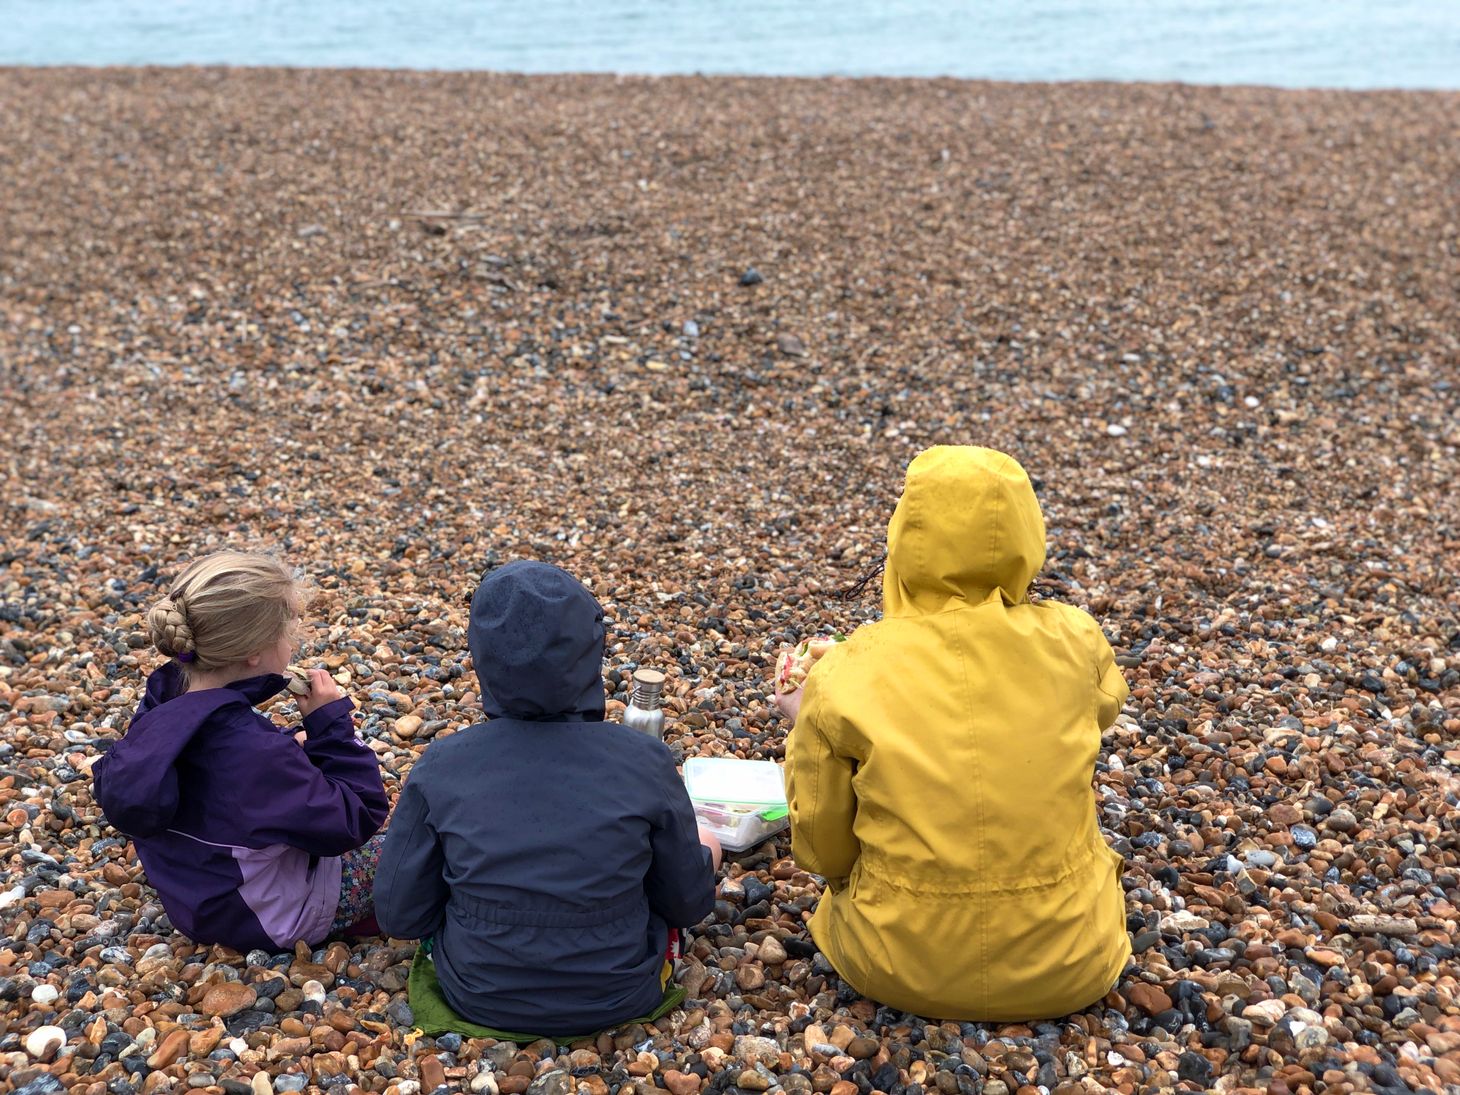 A drizzly beach plastic-free picnic for 2 Minute Day